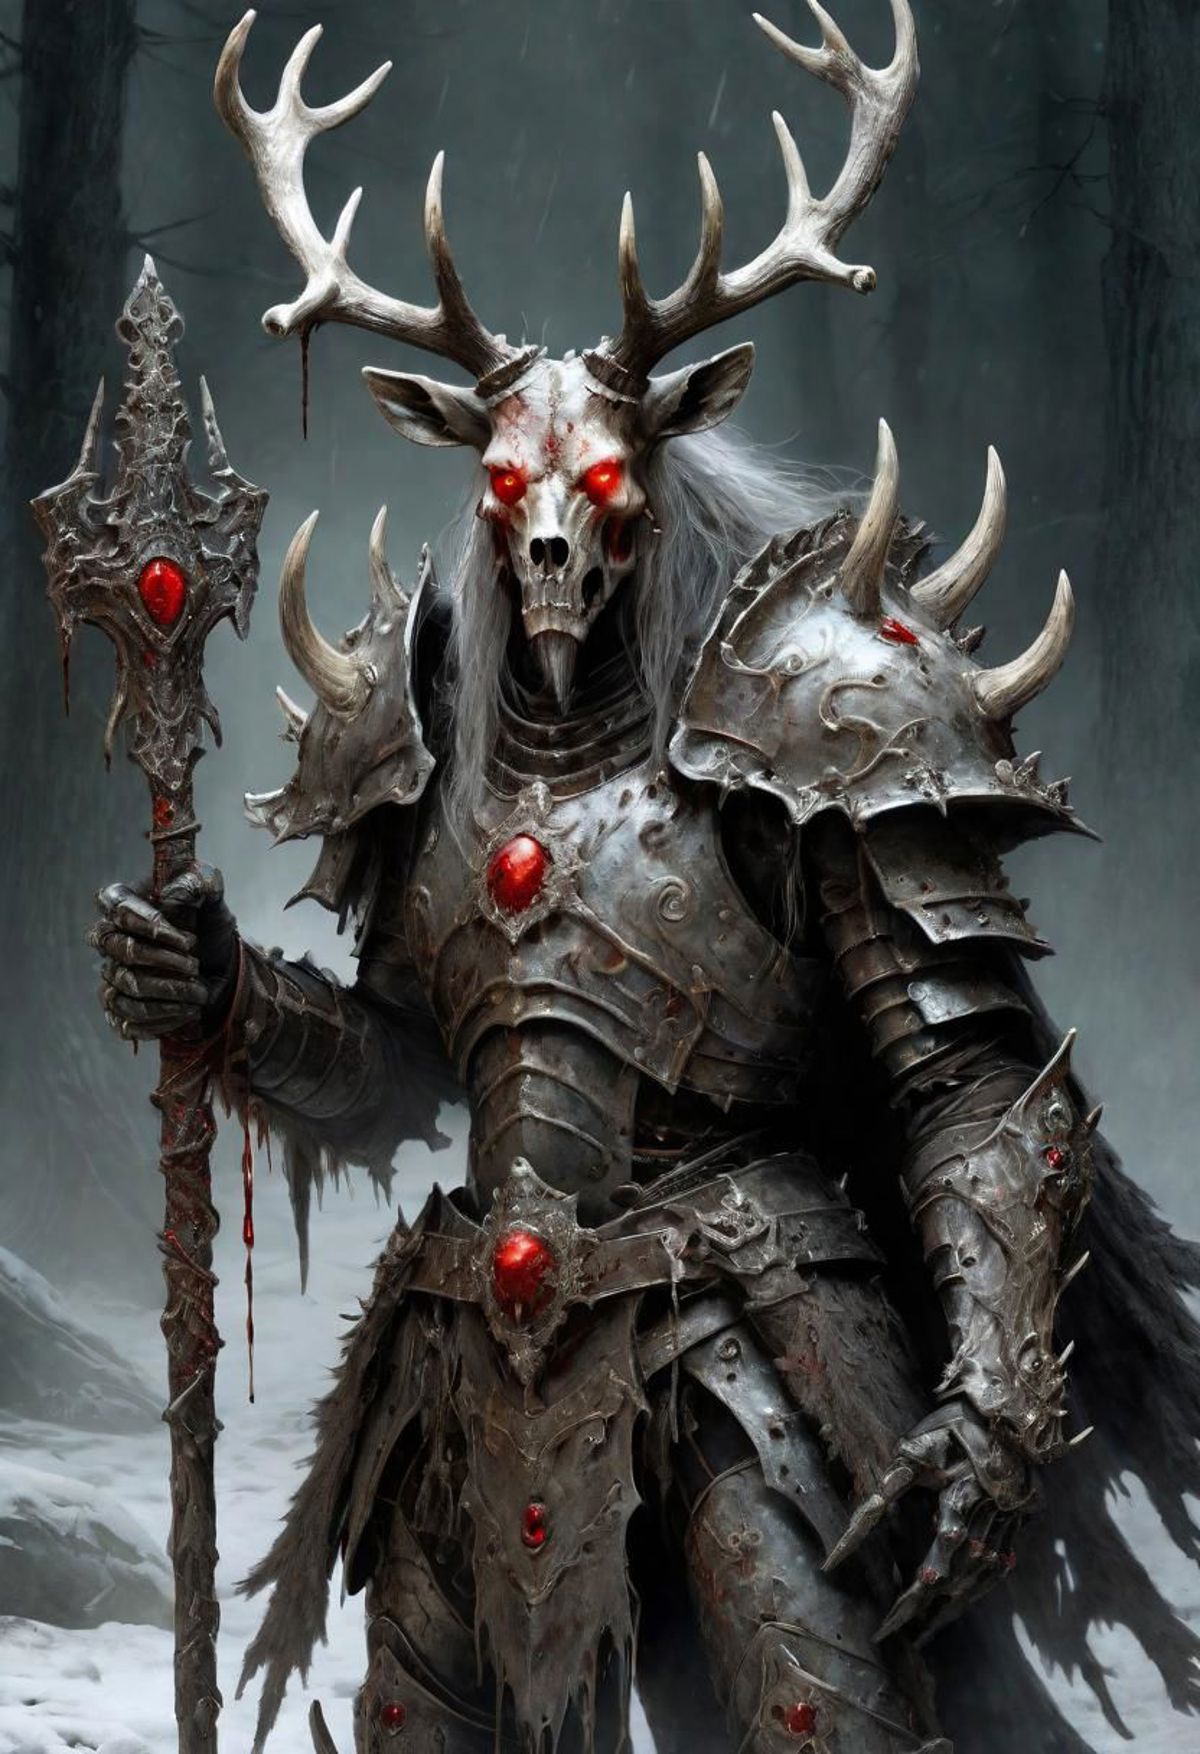 A demonic warrior with a spear and horns.